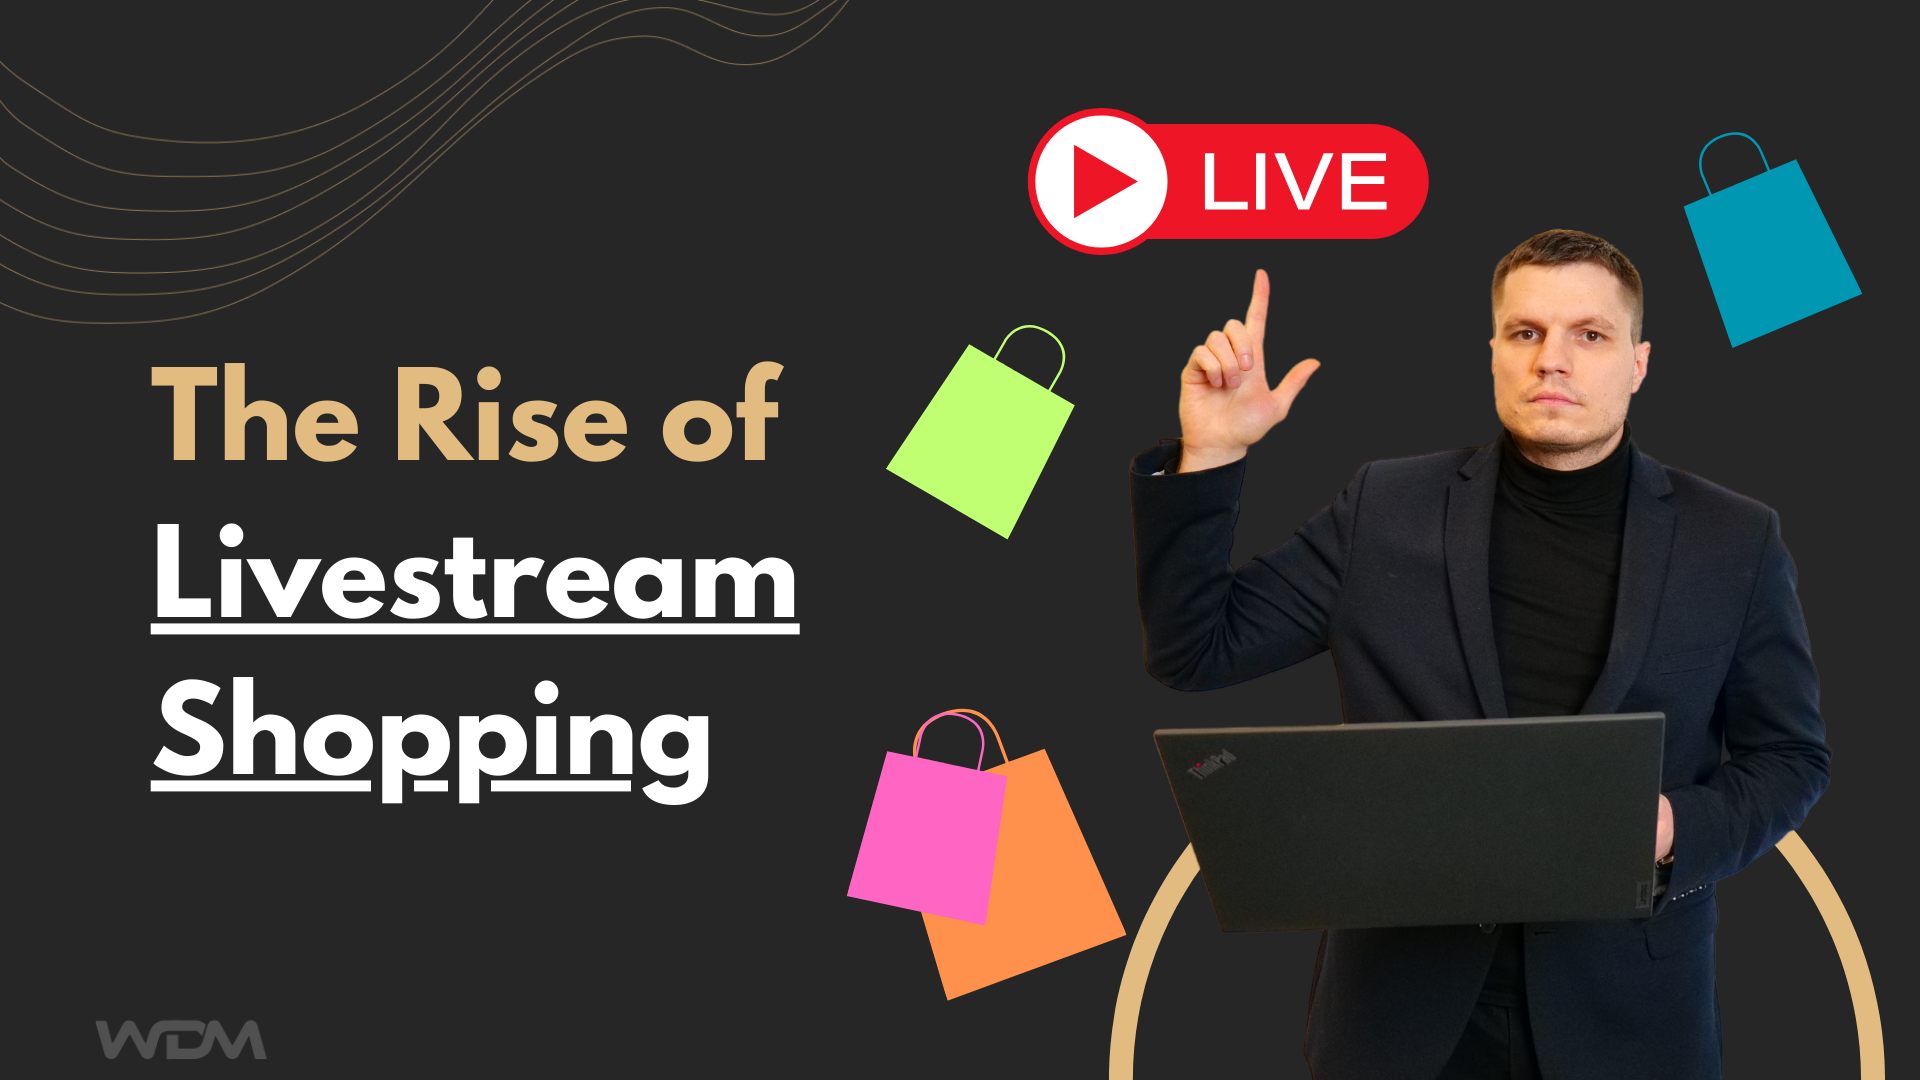 The Rise of Livestream Shopping